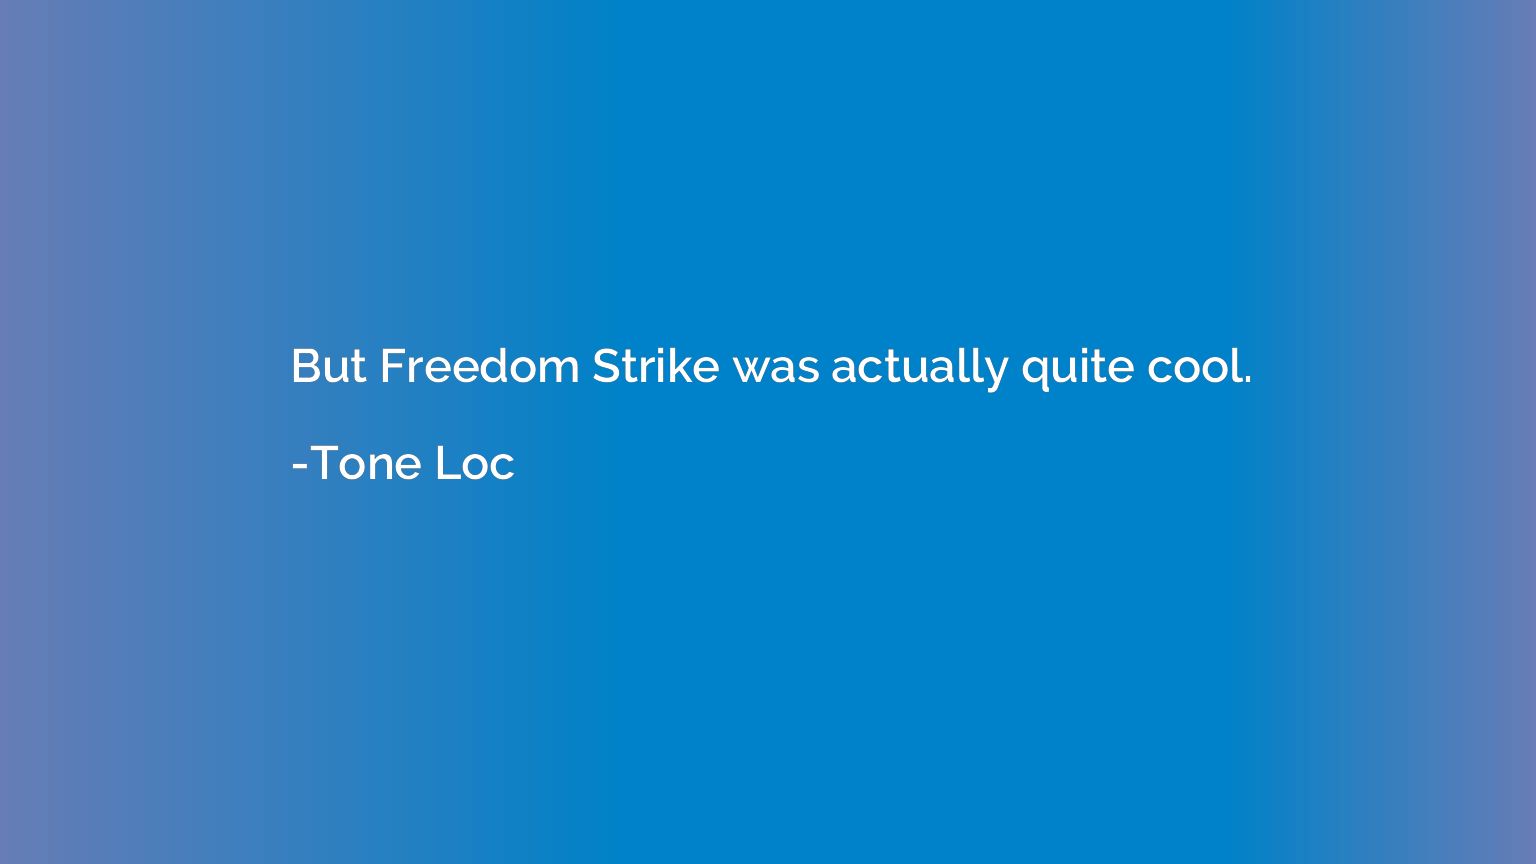 But Freedom Strike was actually quite cool.